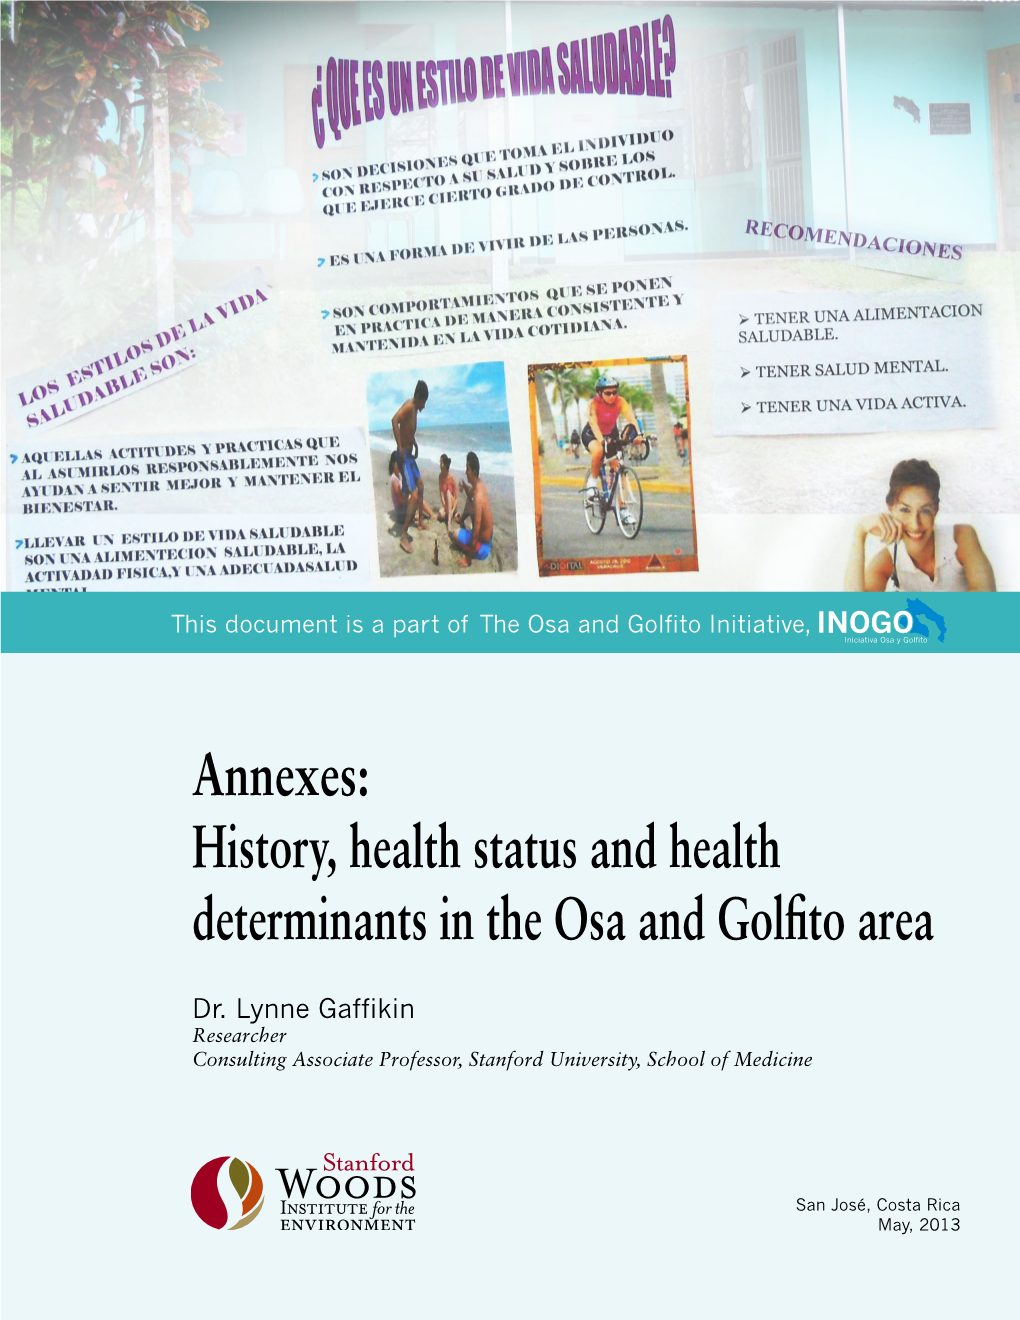 Annexes: History, Health Status and Health Determinants in the Osa and Golfito Area